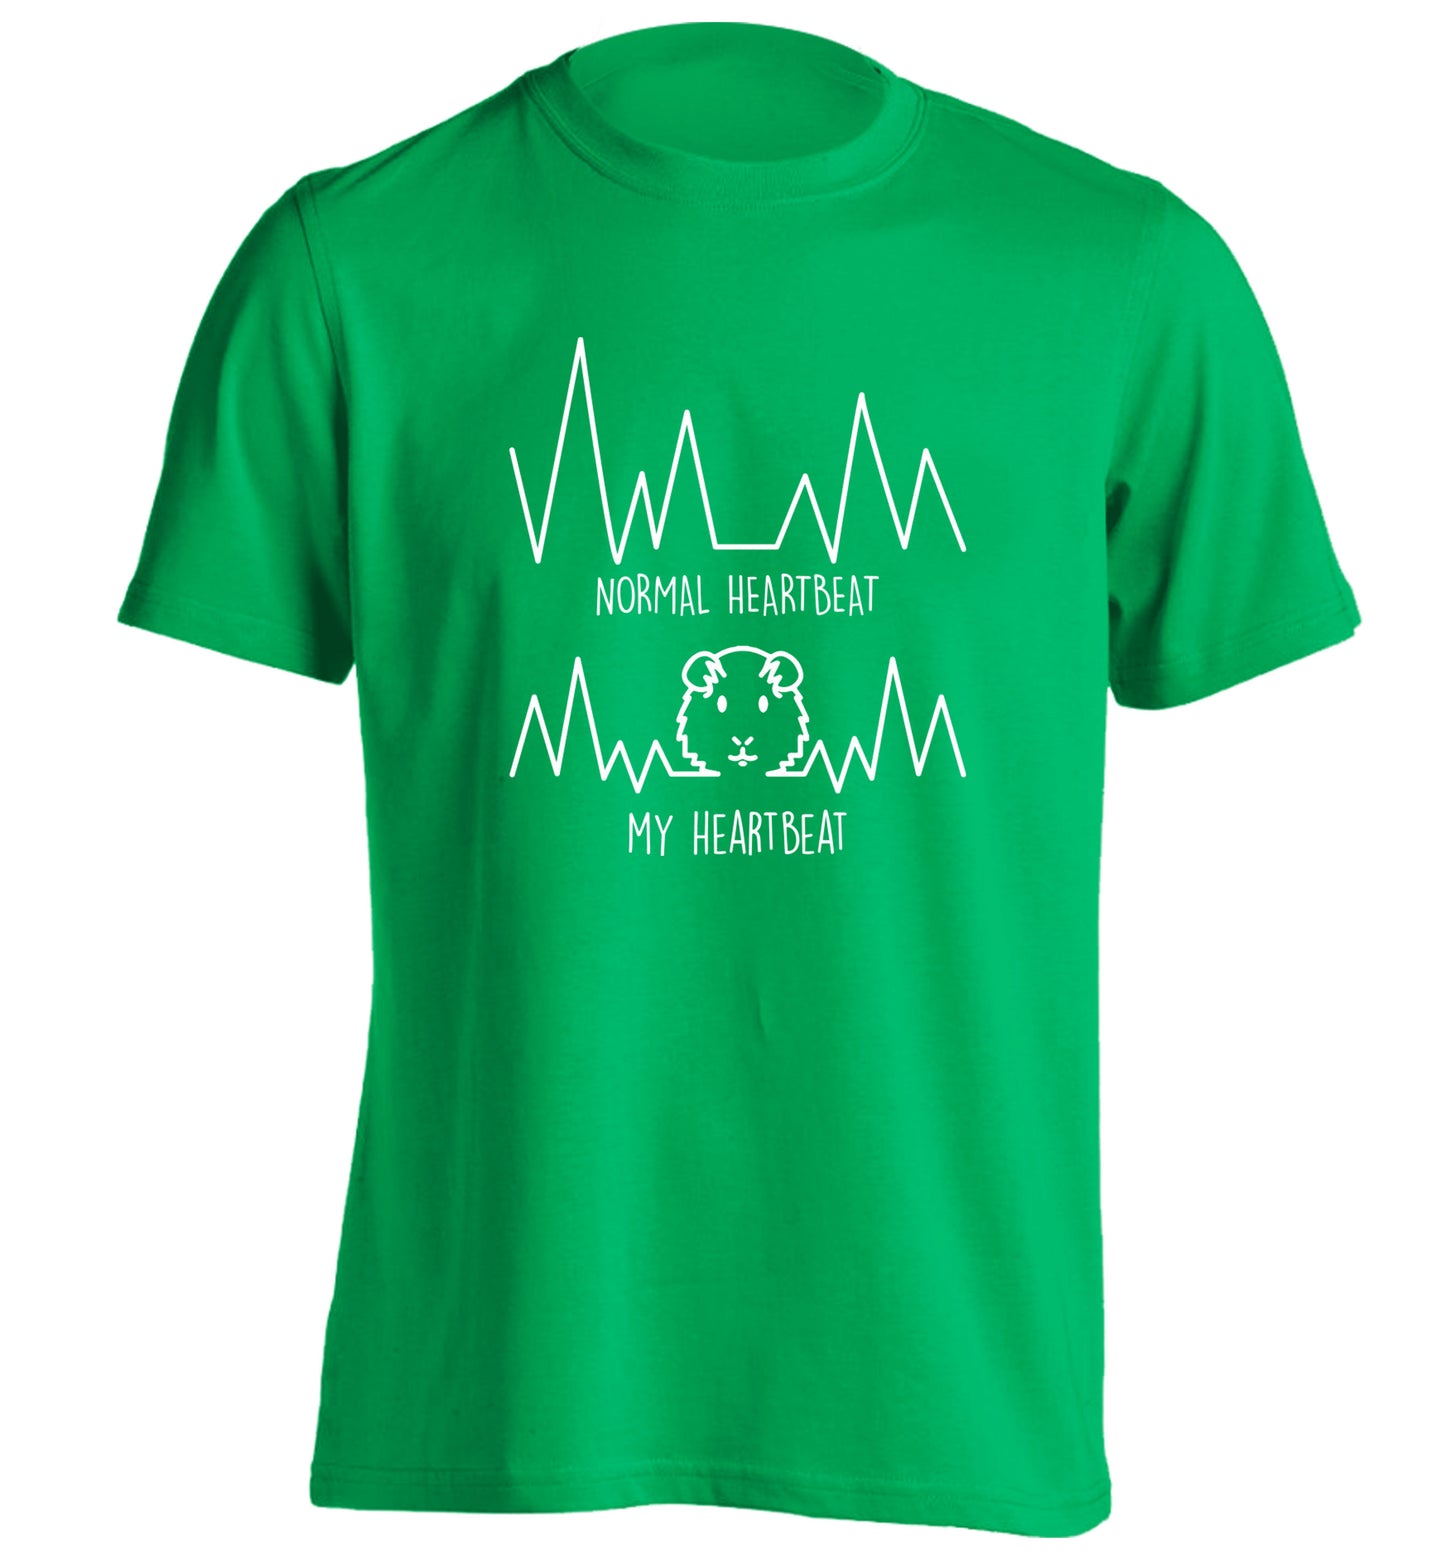 Normal heartbeat vs my heartbeat guinea pig lover adults unisex green Tshirt 2XL